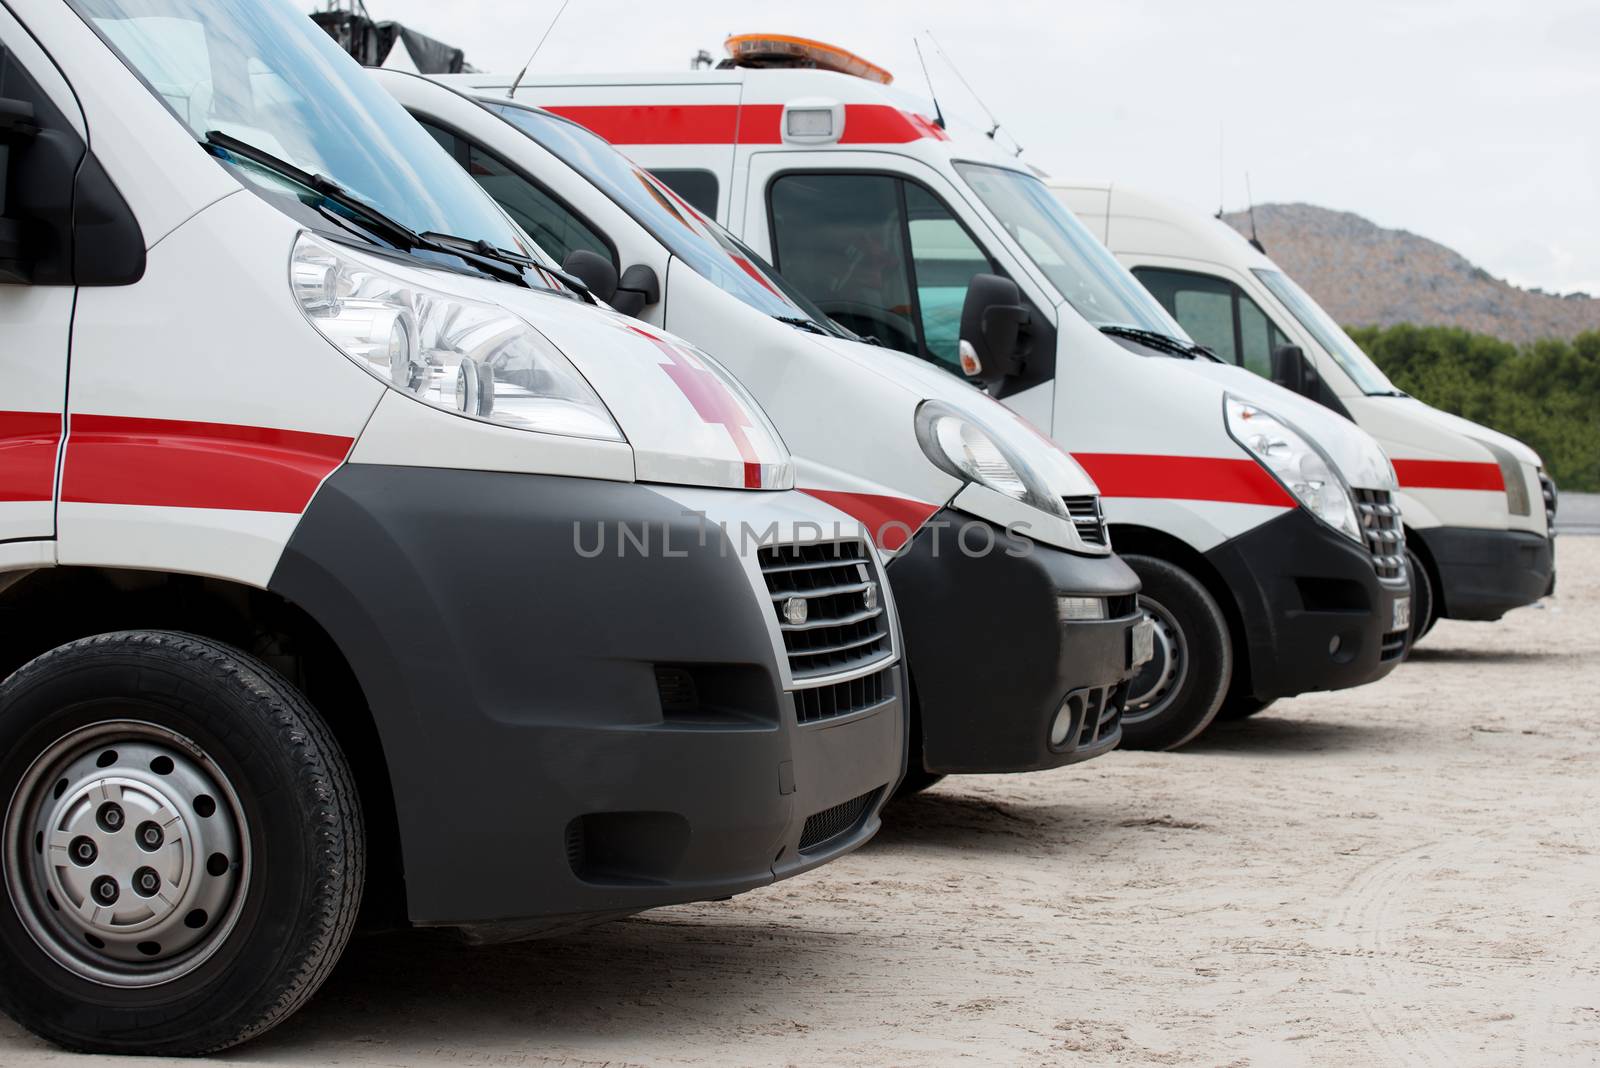 Ambulance cars parked on the beach. by dmitrimaruta